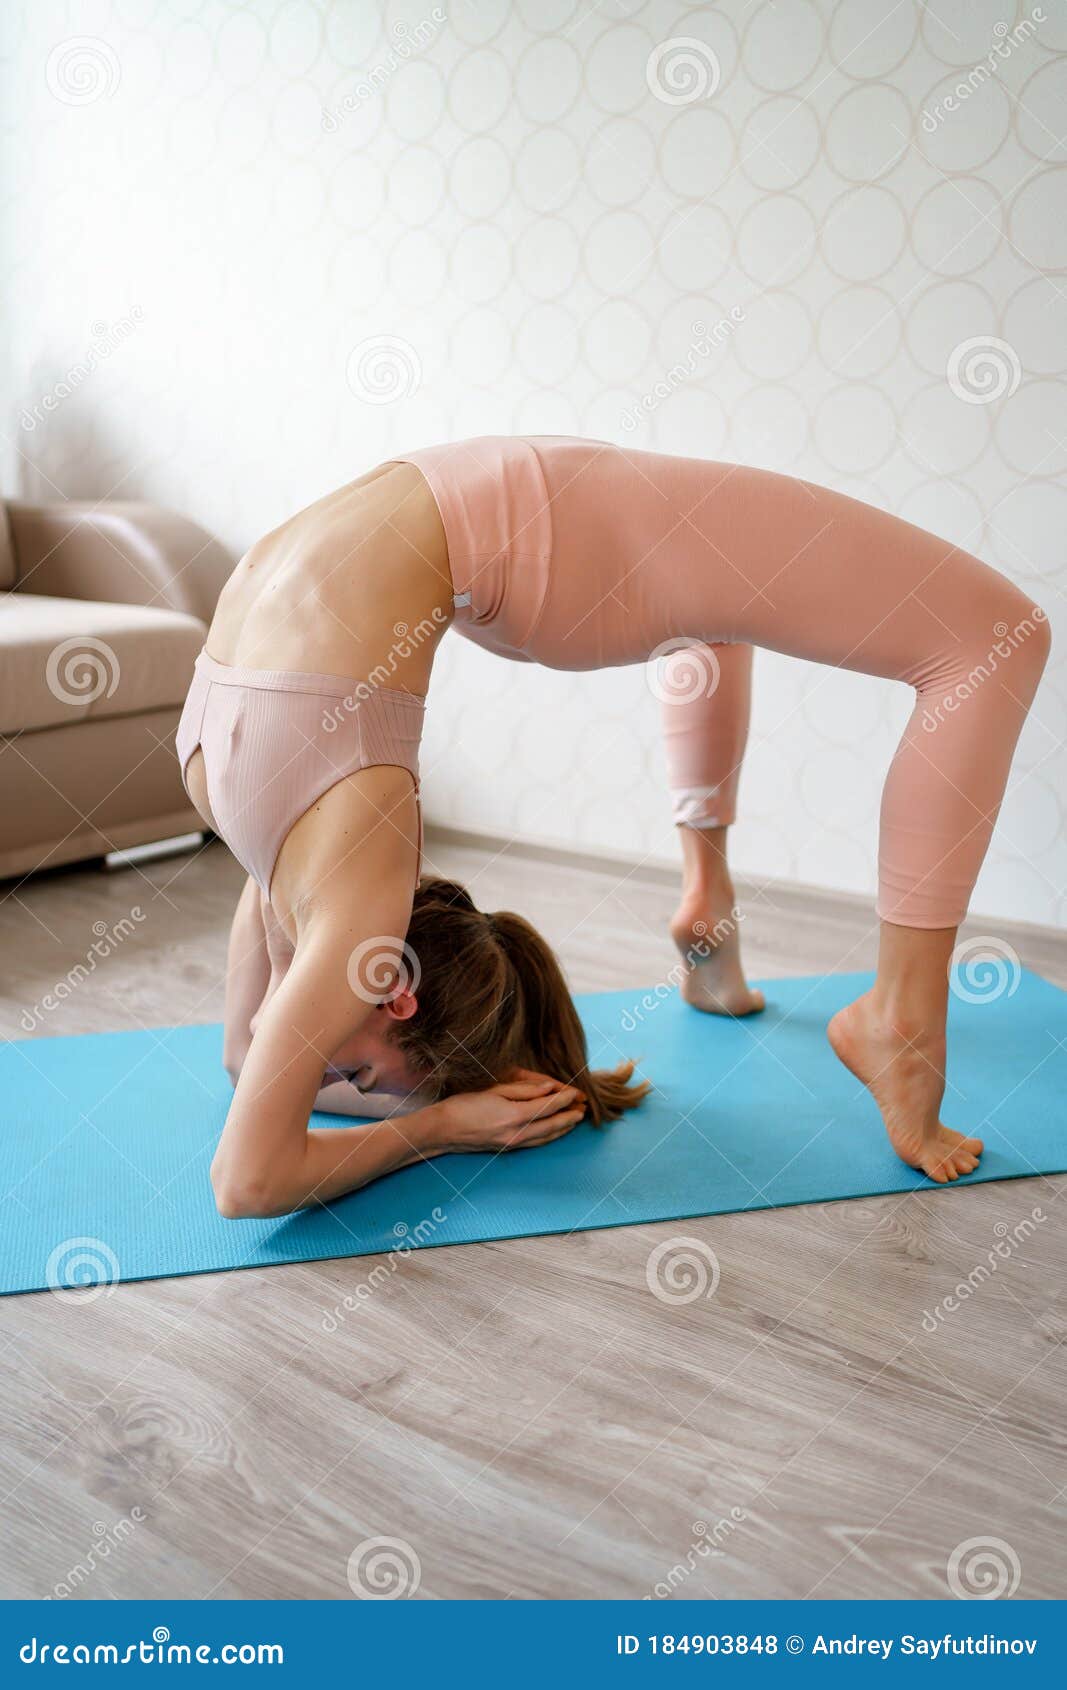 Girl with Beautiful Athletic Body Does Yoga Exercises at Home